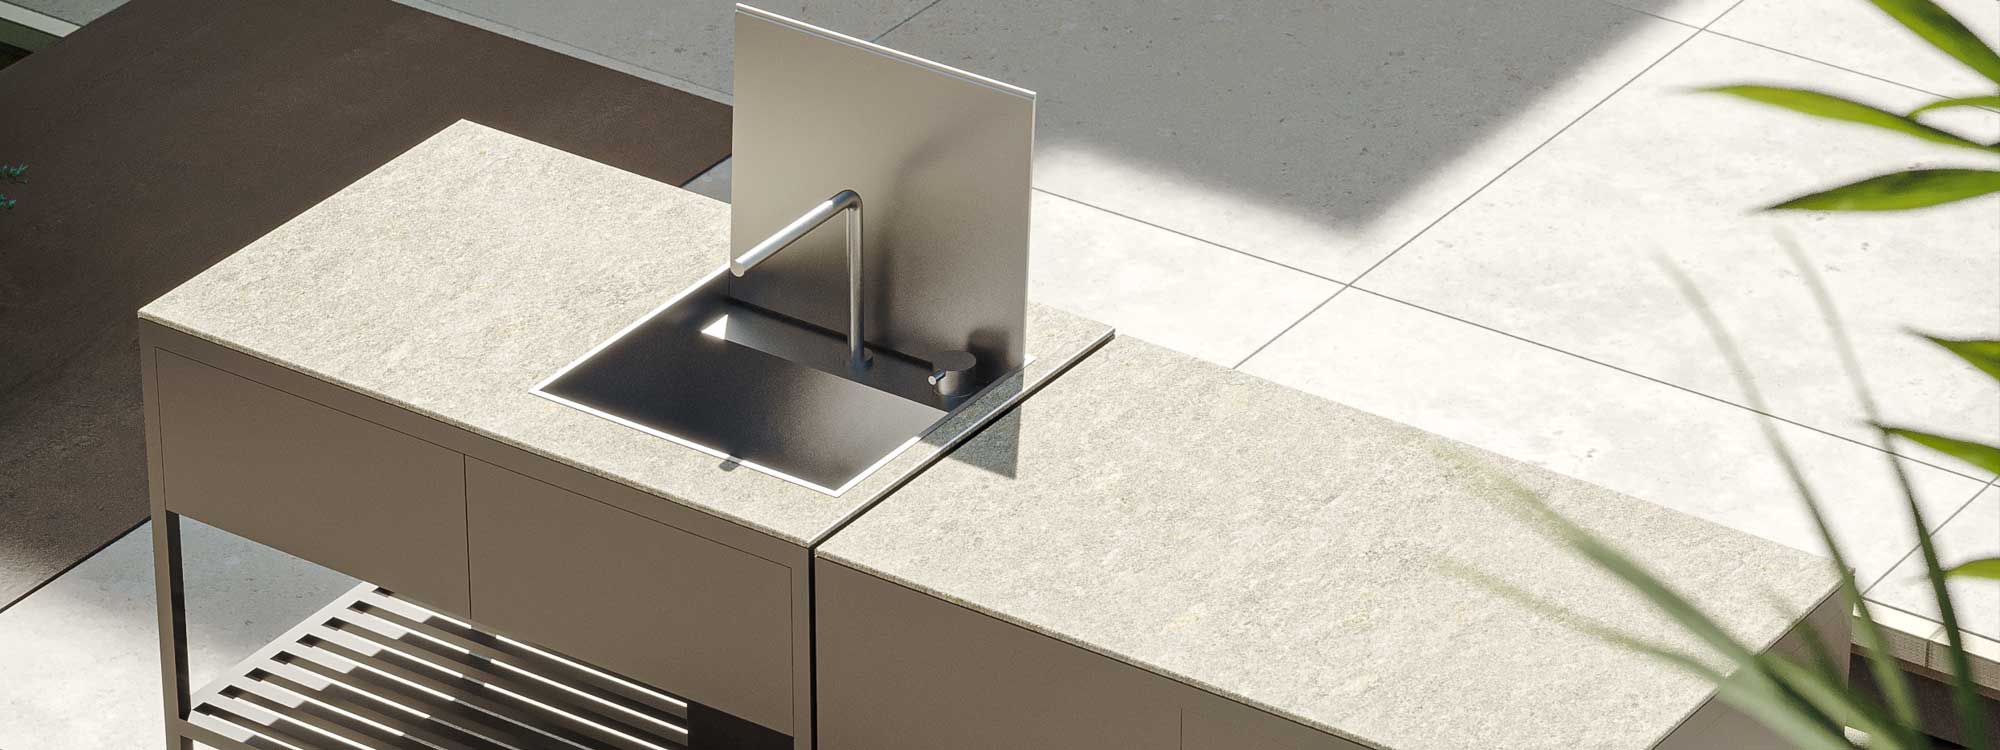 Image of aerial view of Eterna outdoor kitchen's stainless steel sink by Oiside